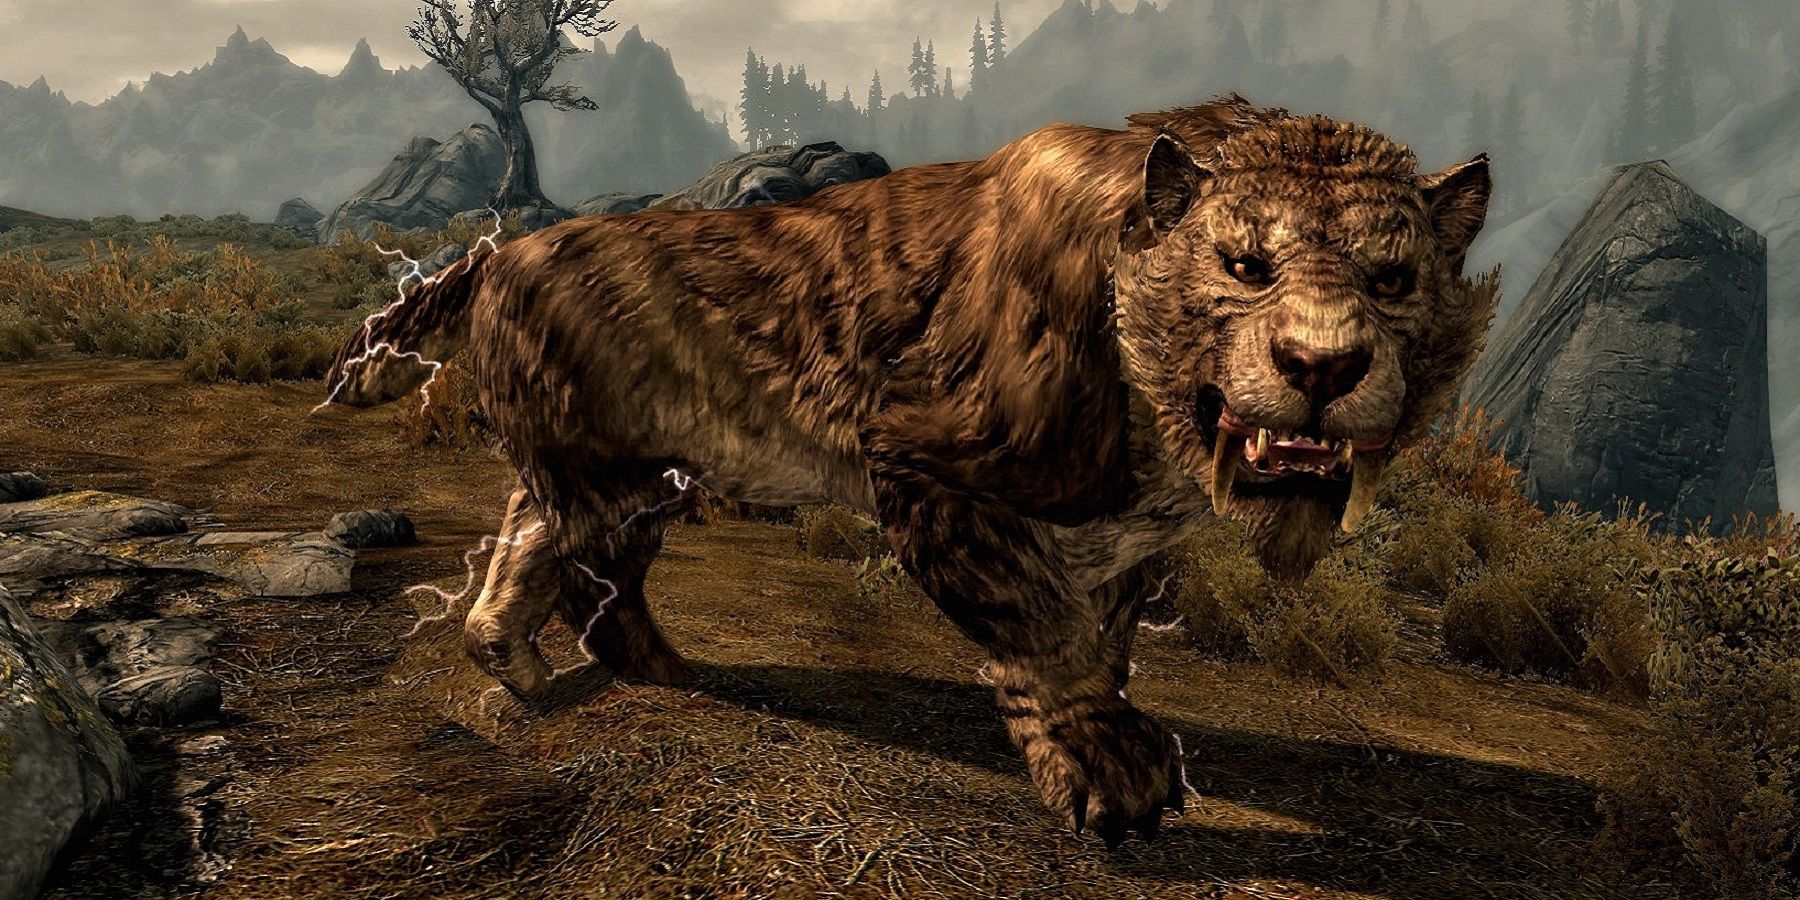 Image from The Elder Scrolls 5: Skyrim showing a sabre cat.